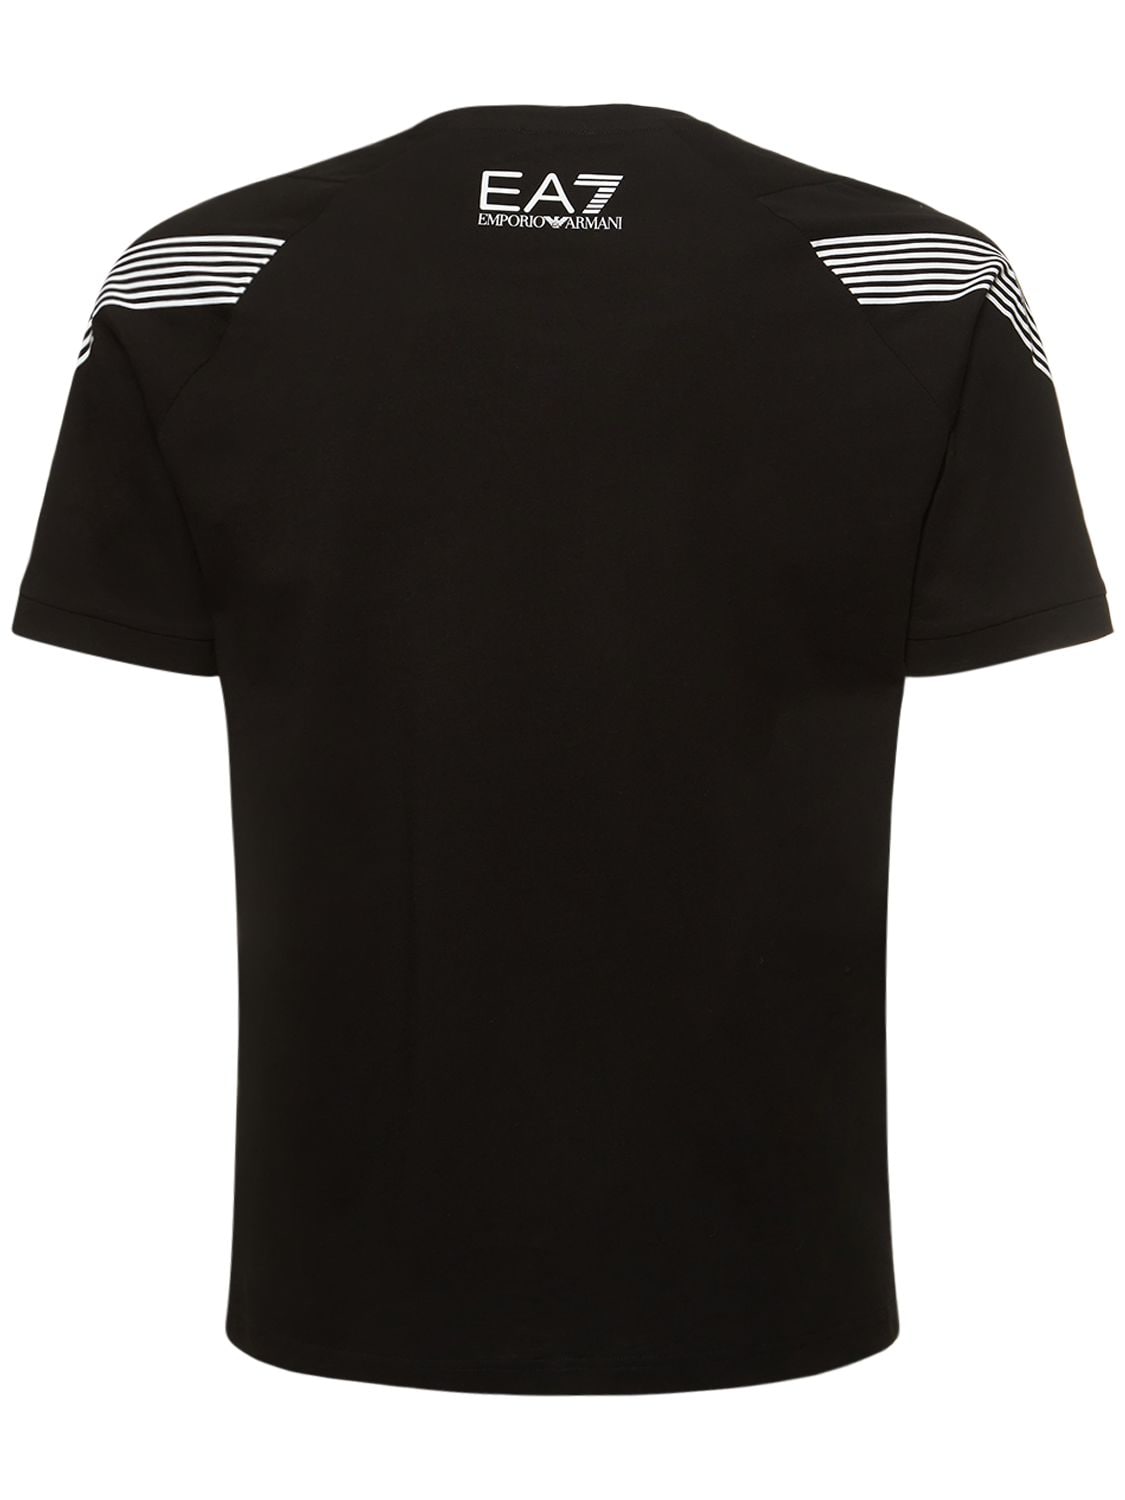 EA7 7 LINES RECYCLED COTTON JERSEY T-SHIRT 